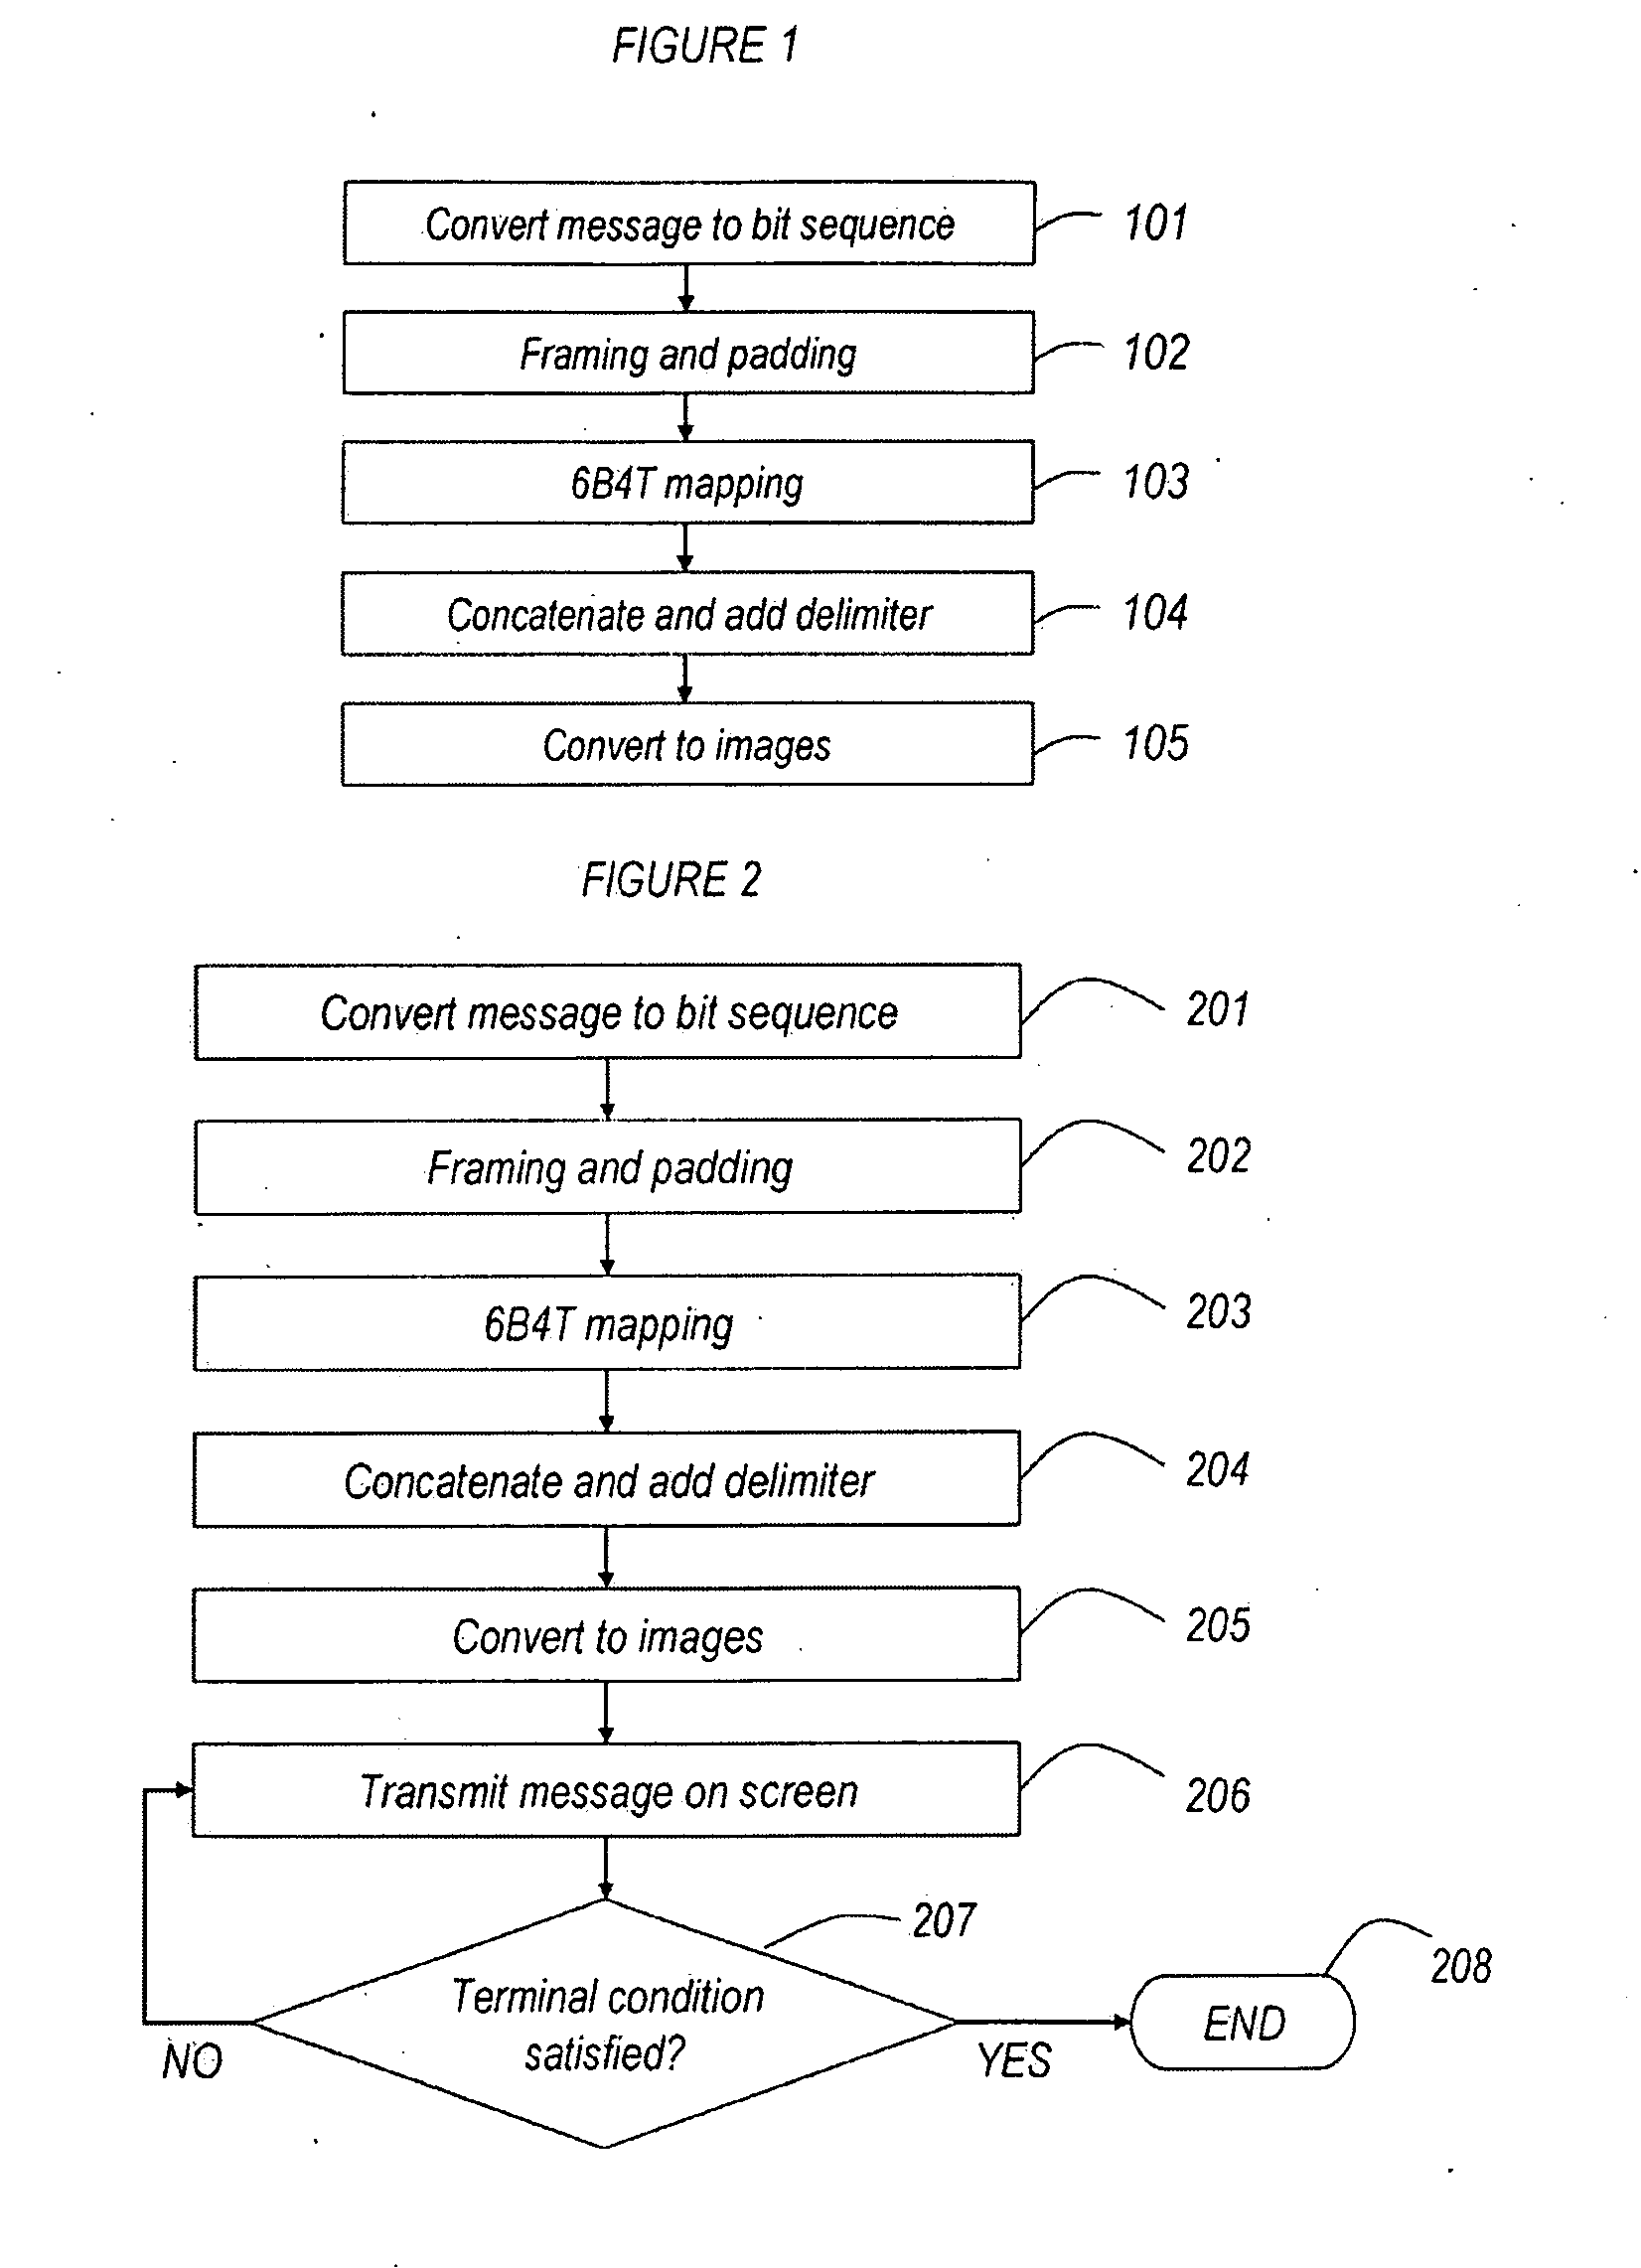 Method for transmission of a digital message from a display to a handheld receiver